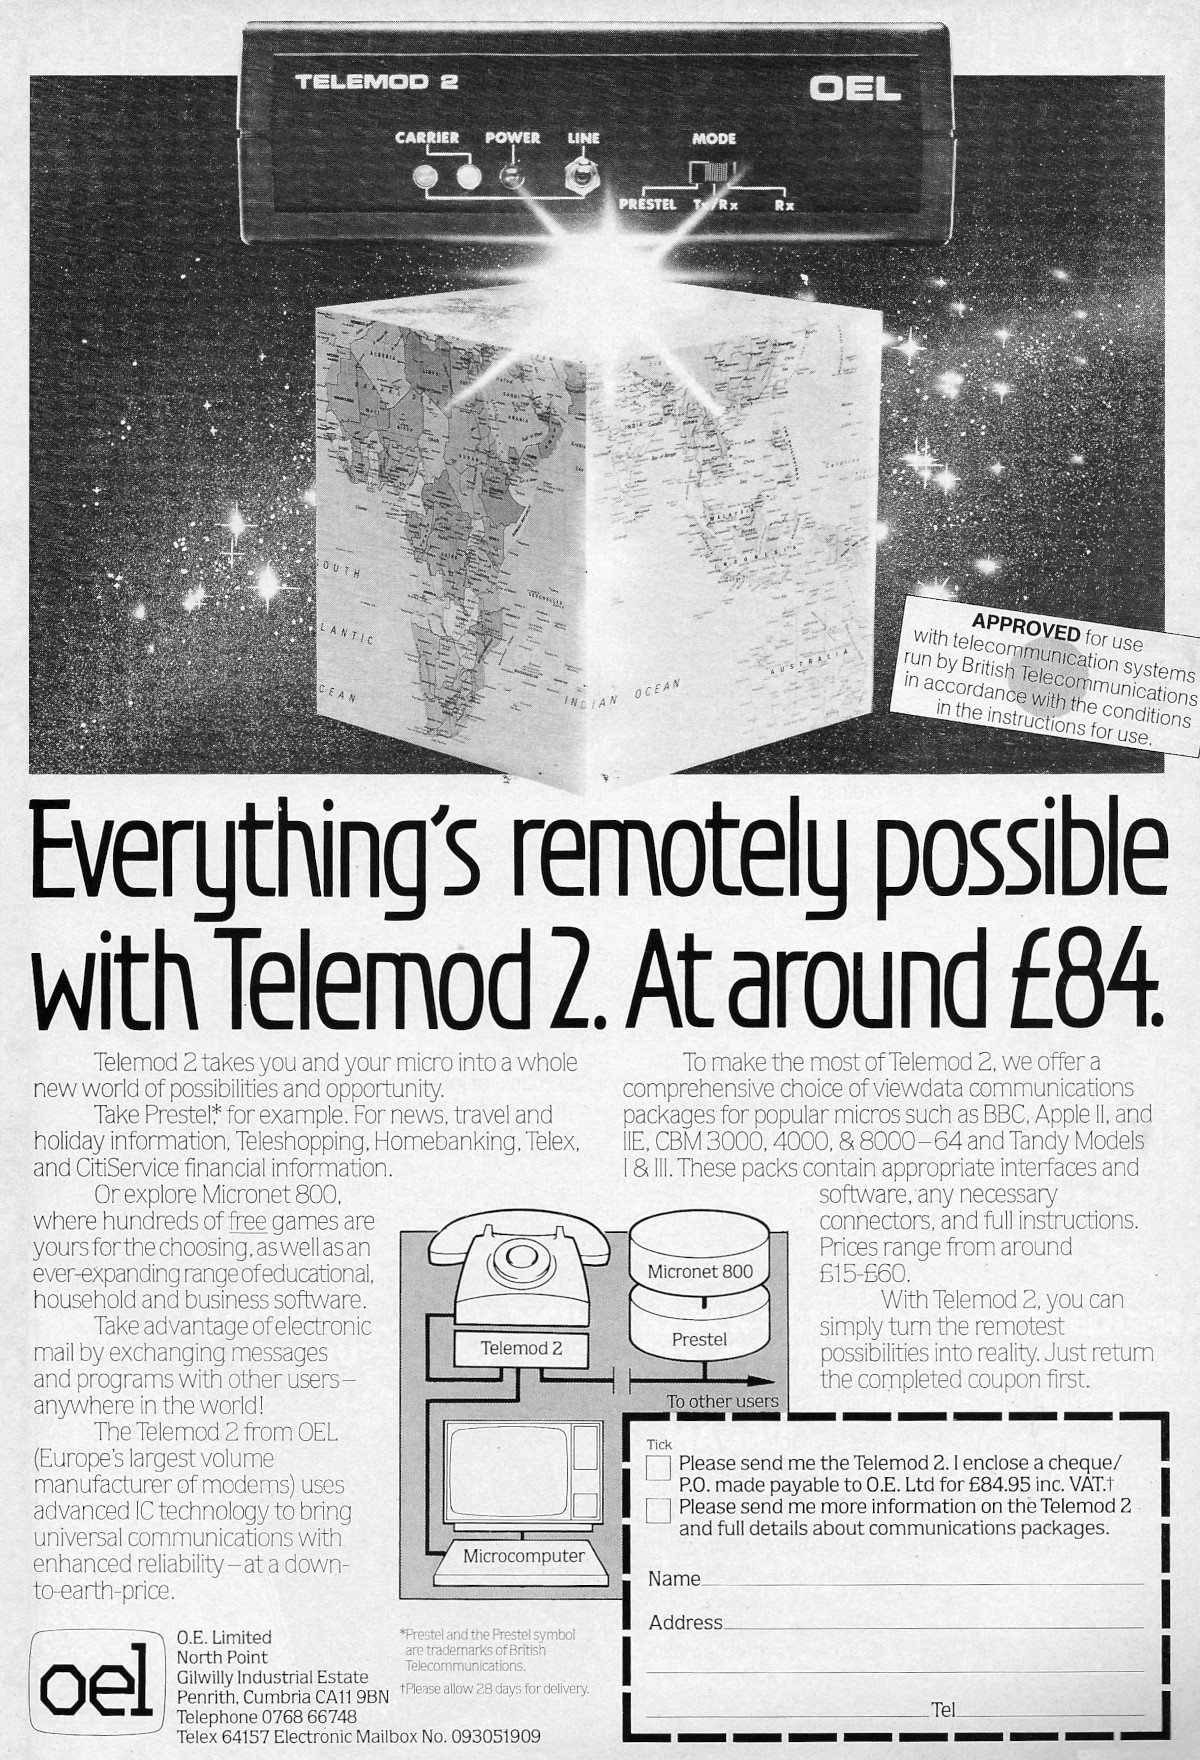 The Telemod 2 modem from OEL of Penrith, Cumbria - quite a bargain at only £84, or about £310 in 2024. Software and <span class='hilite'><span class='hilite'><span class='hilite'>interface</span></span></span>s were extra though, with prices from £15 - £60